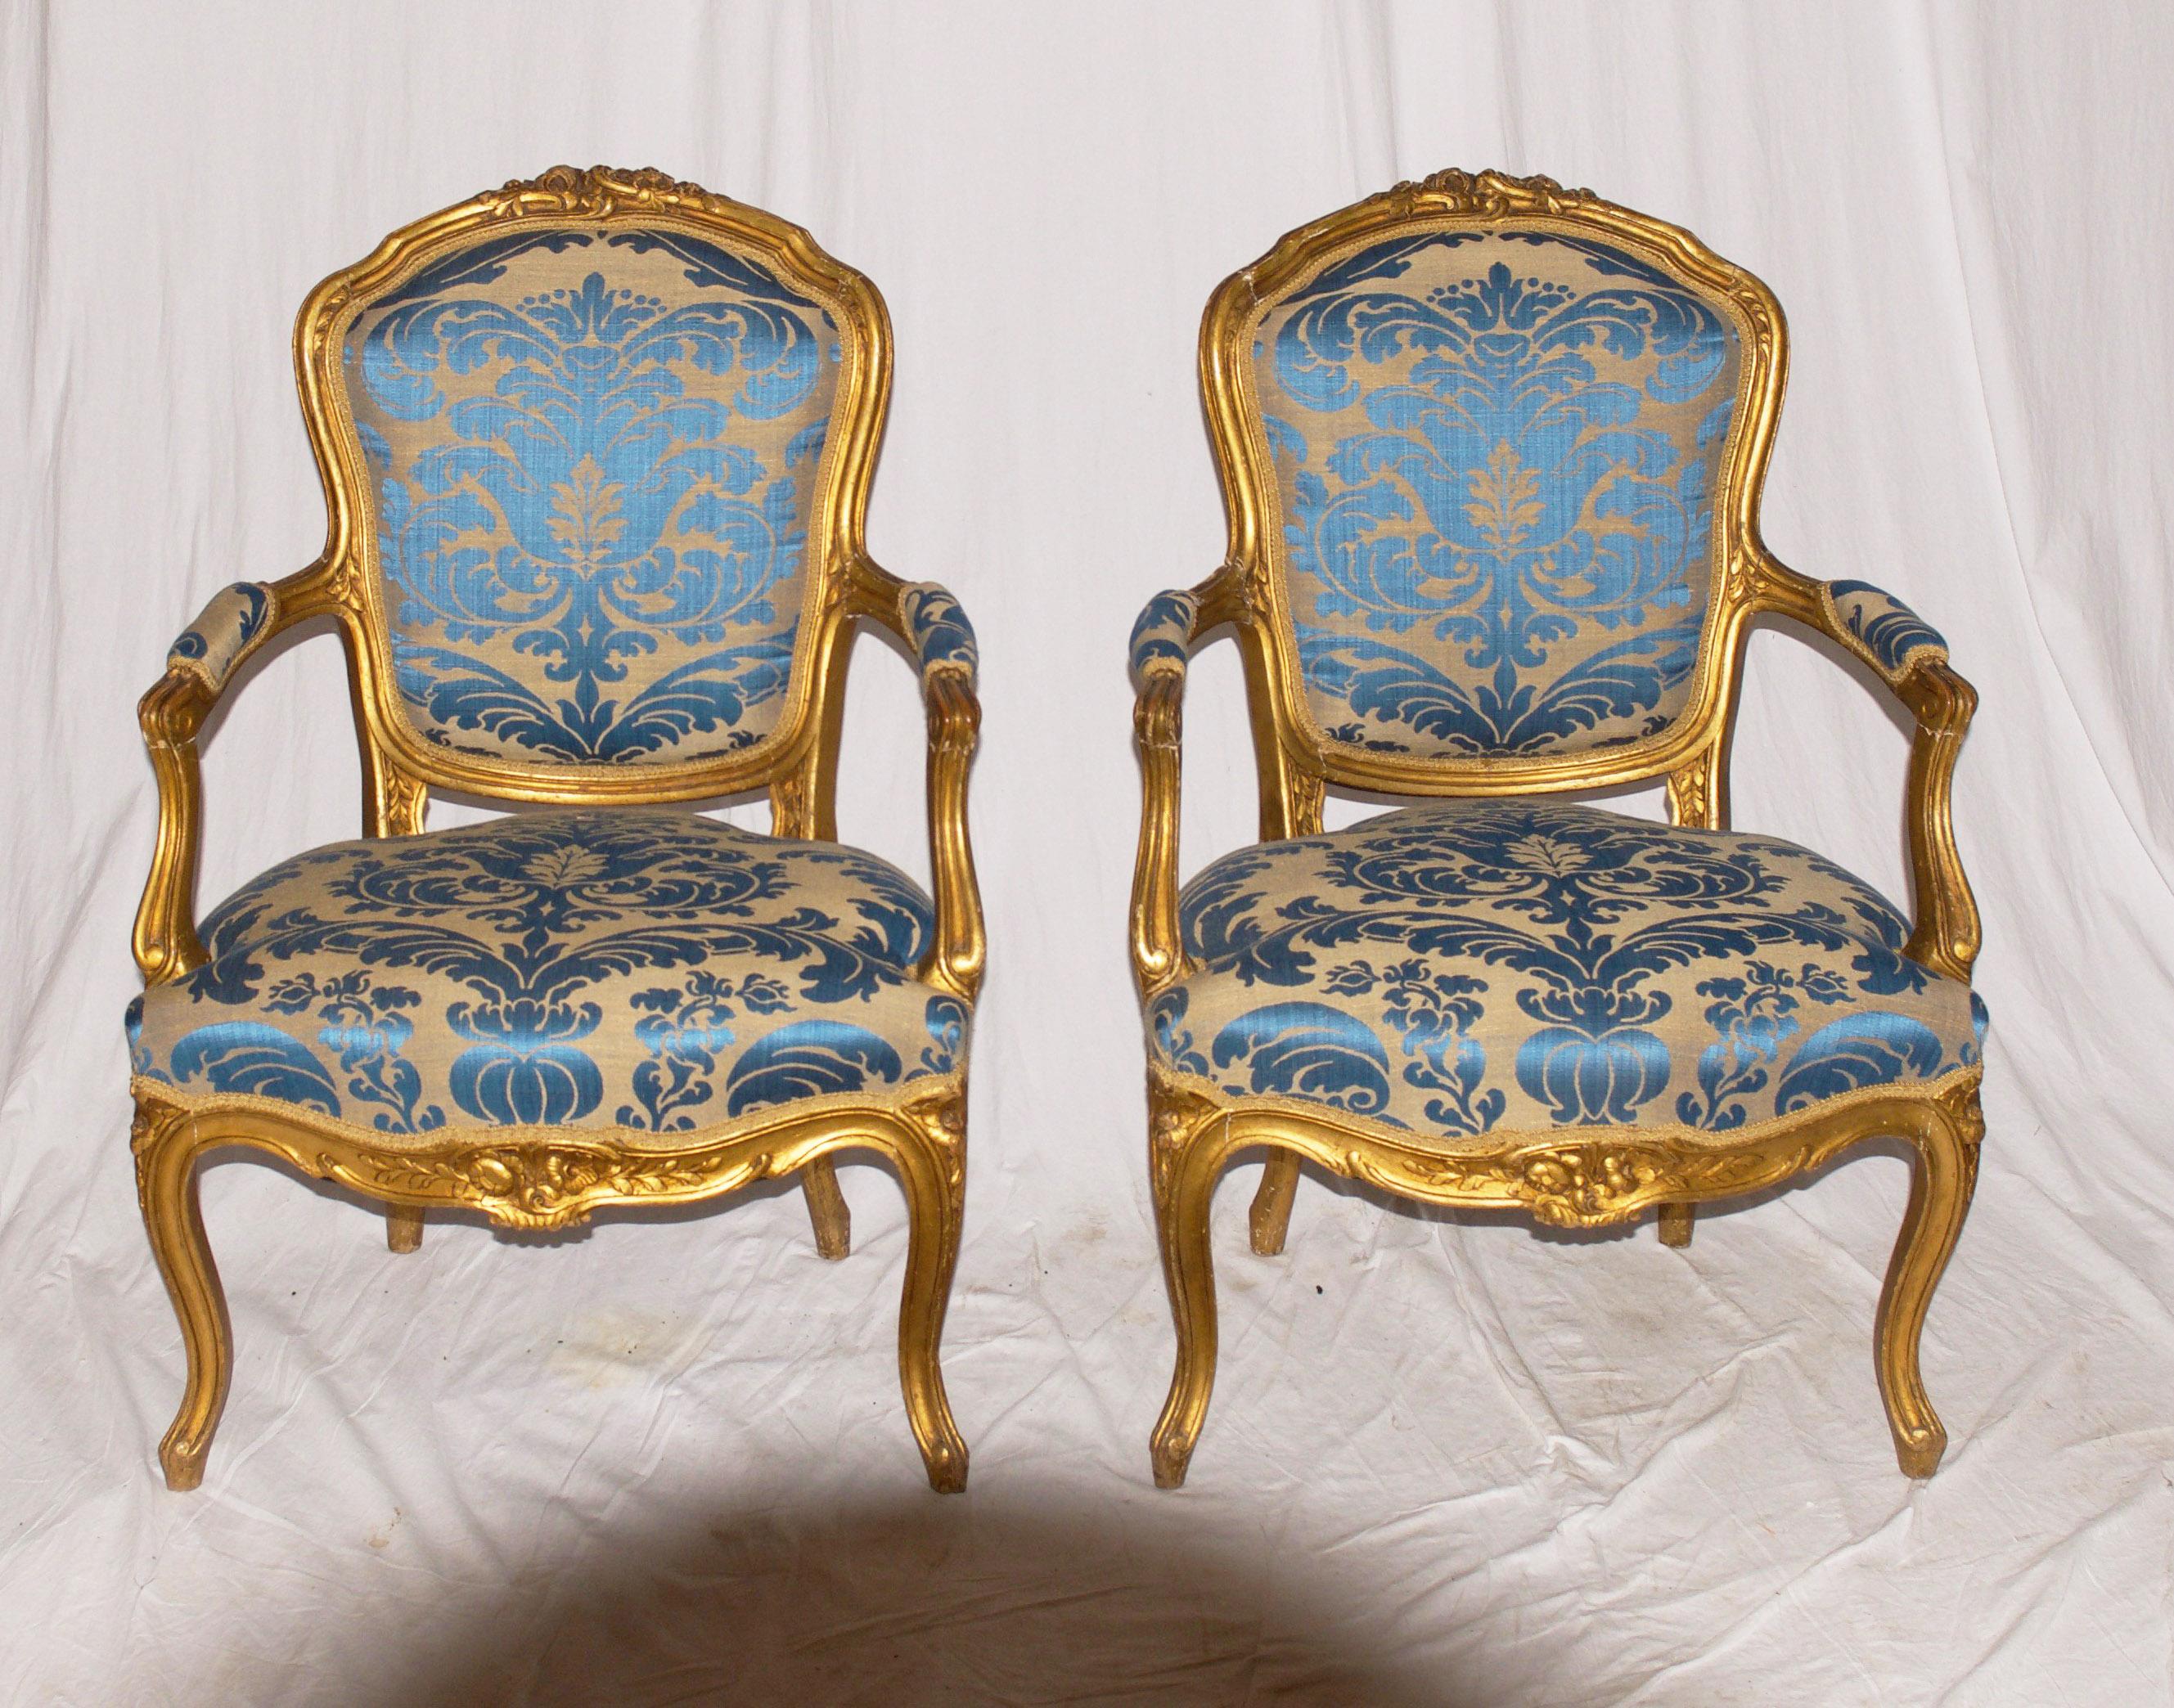 Early 19th Century Pair of Gilded Rococo Armchairs